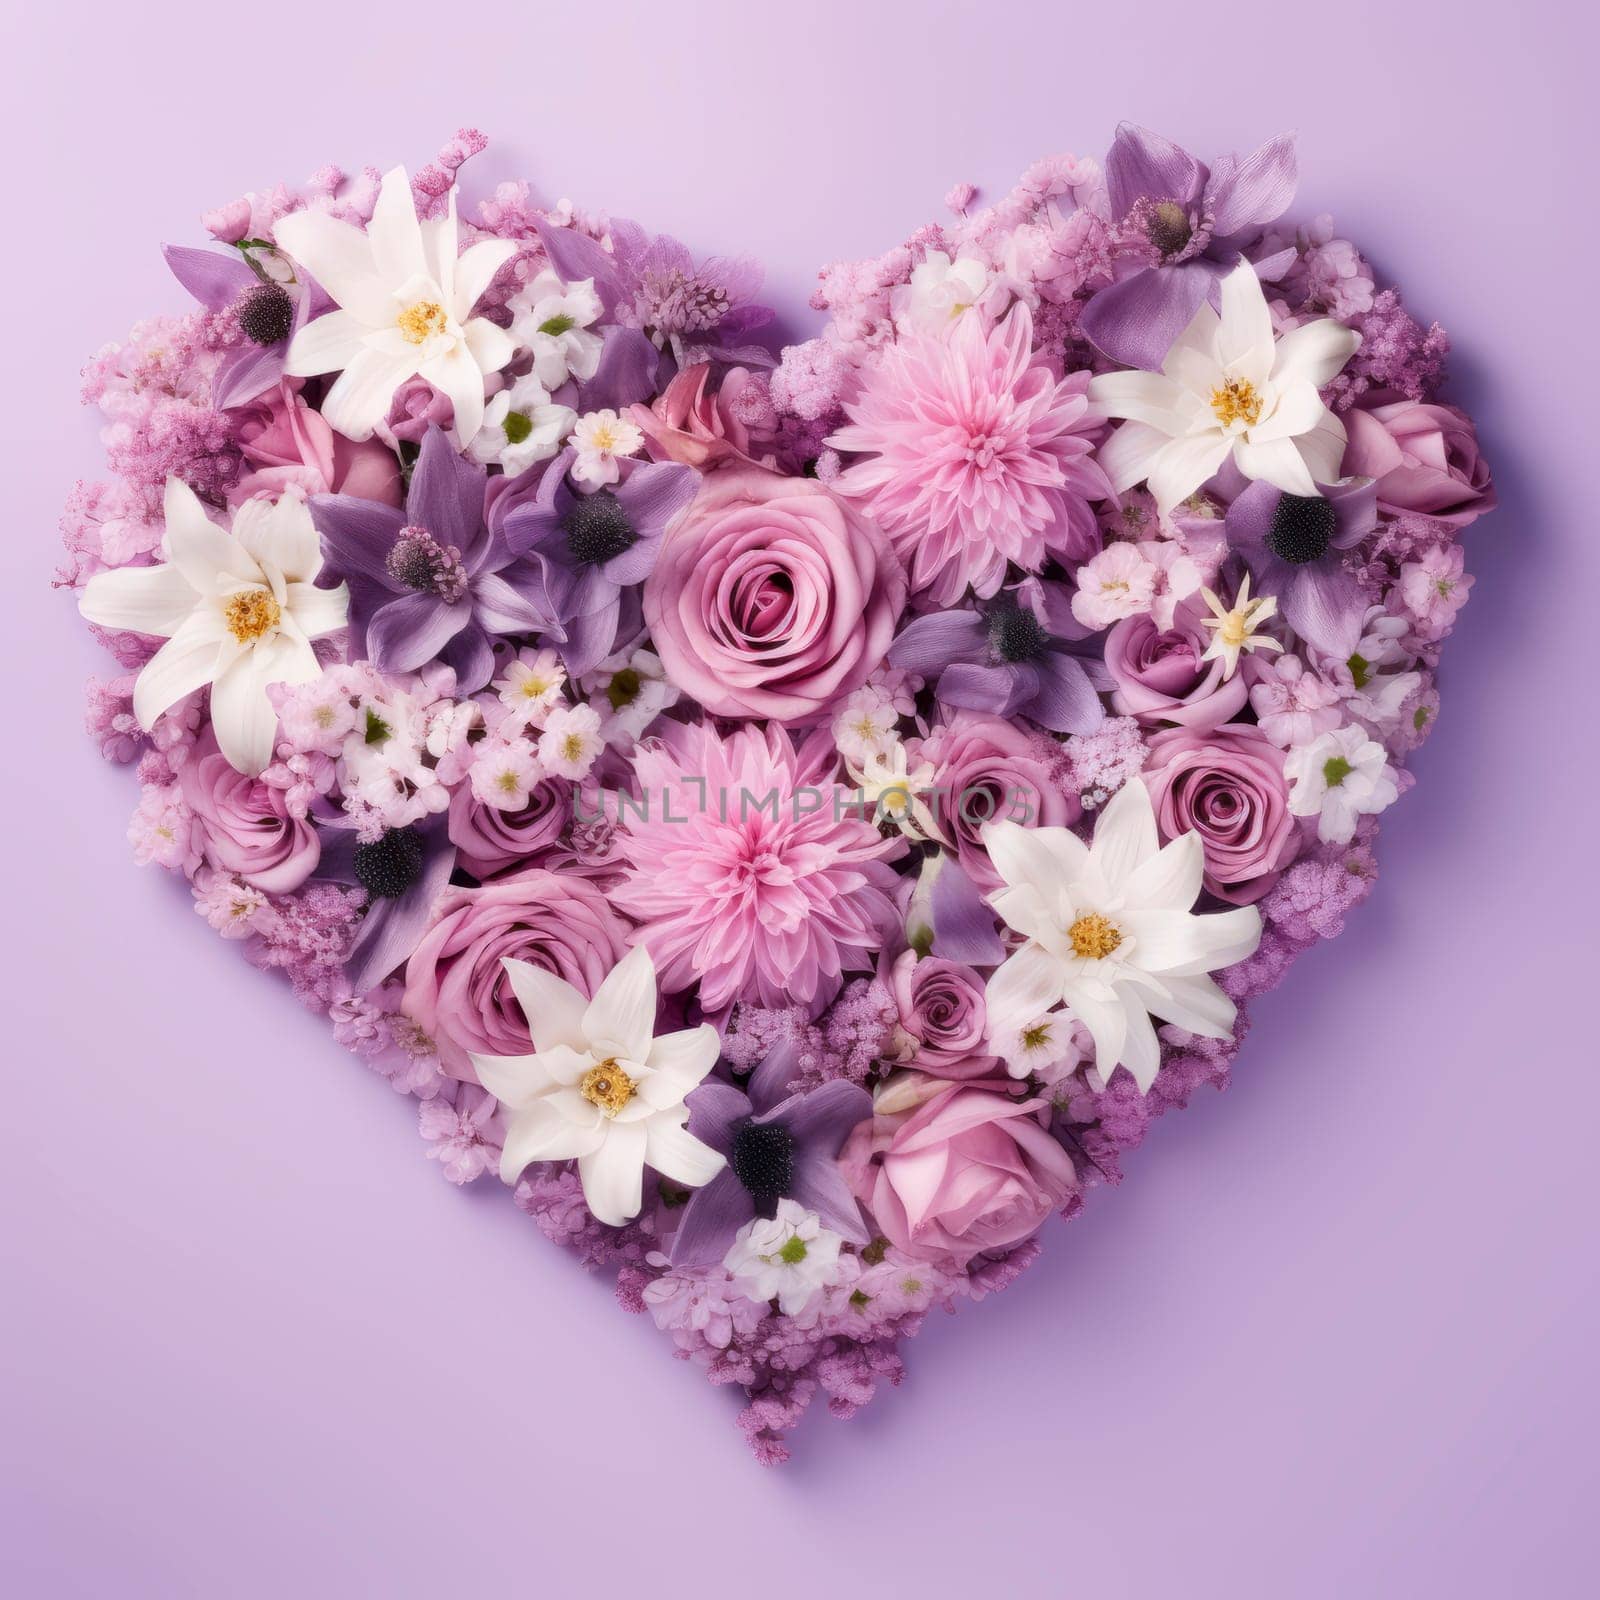 The heart is lined with beautiful multicolored flowers in pink and purple by Spirina